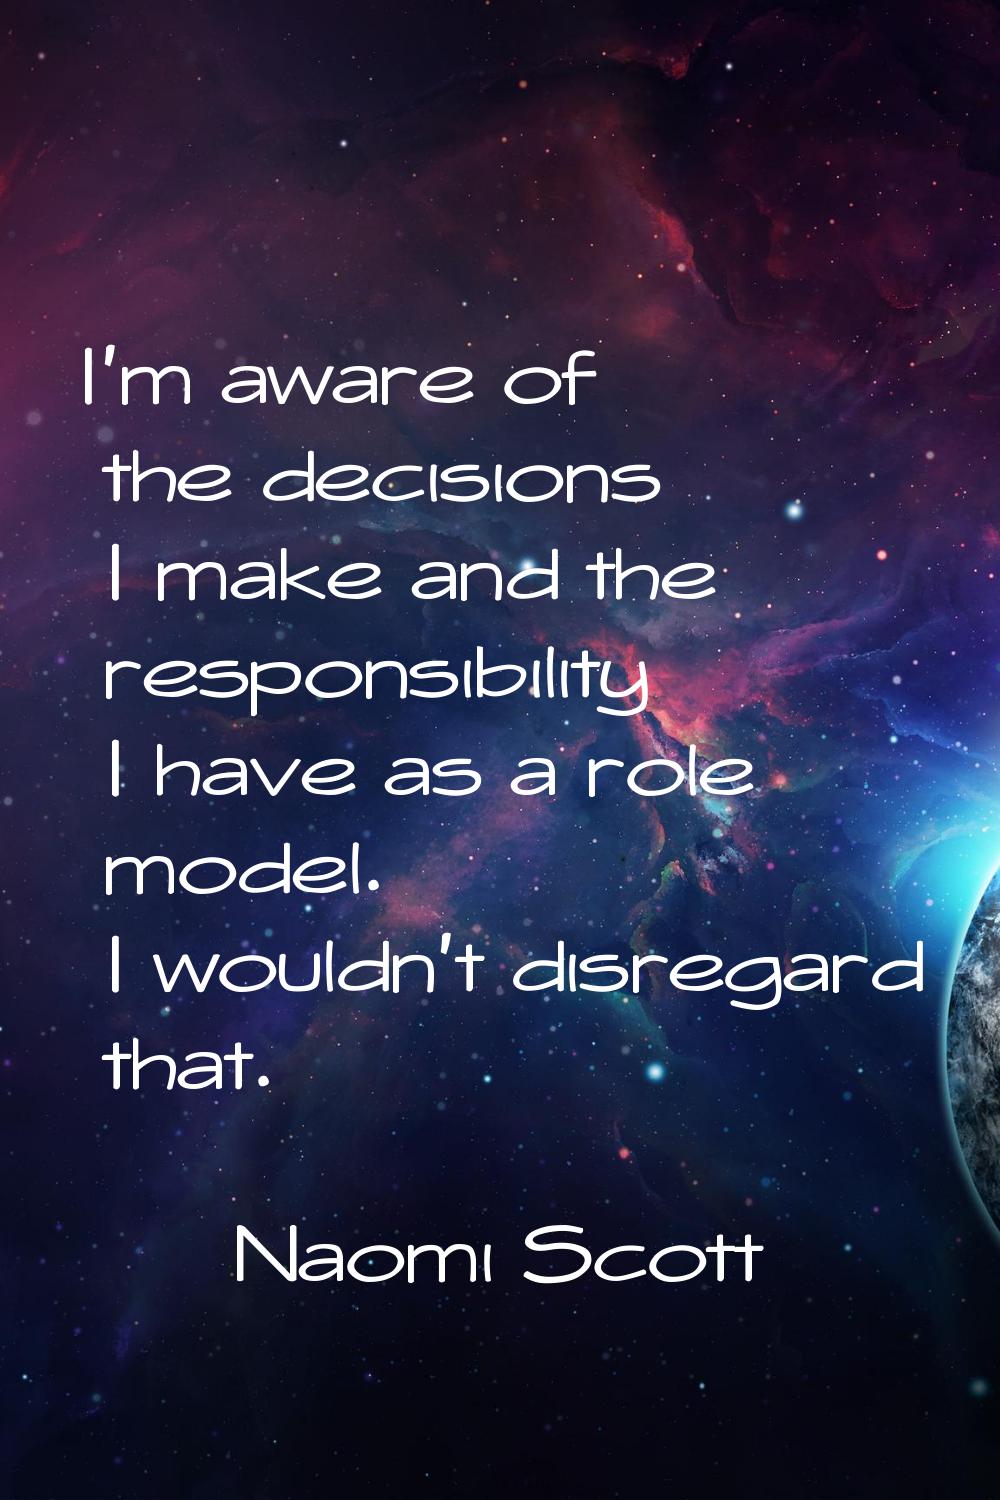 I'm aware of the decisions I make and the responsibility I have as a role model. I wouldn't disrega